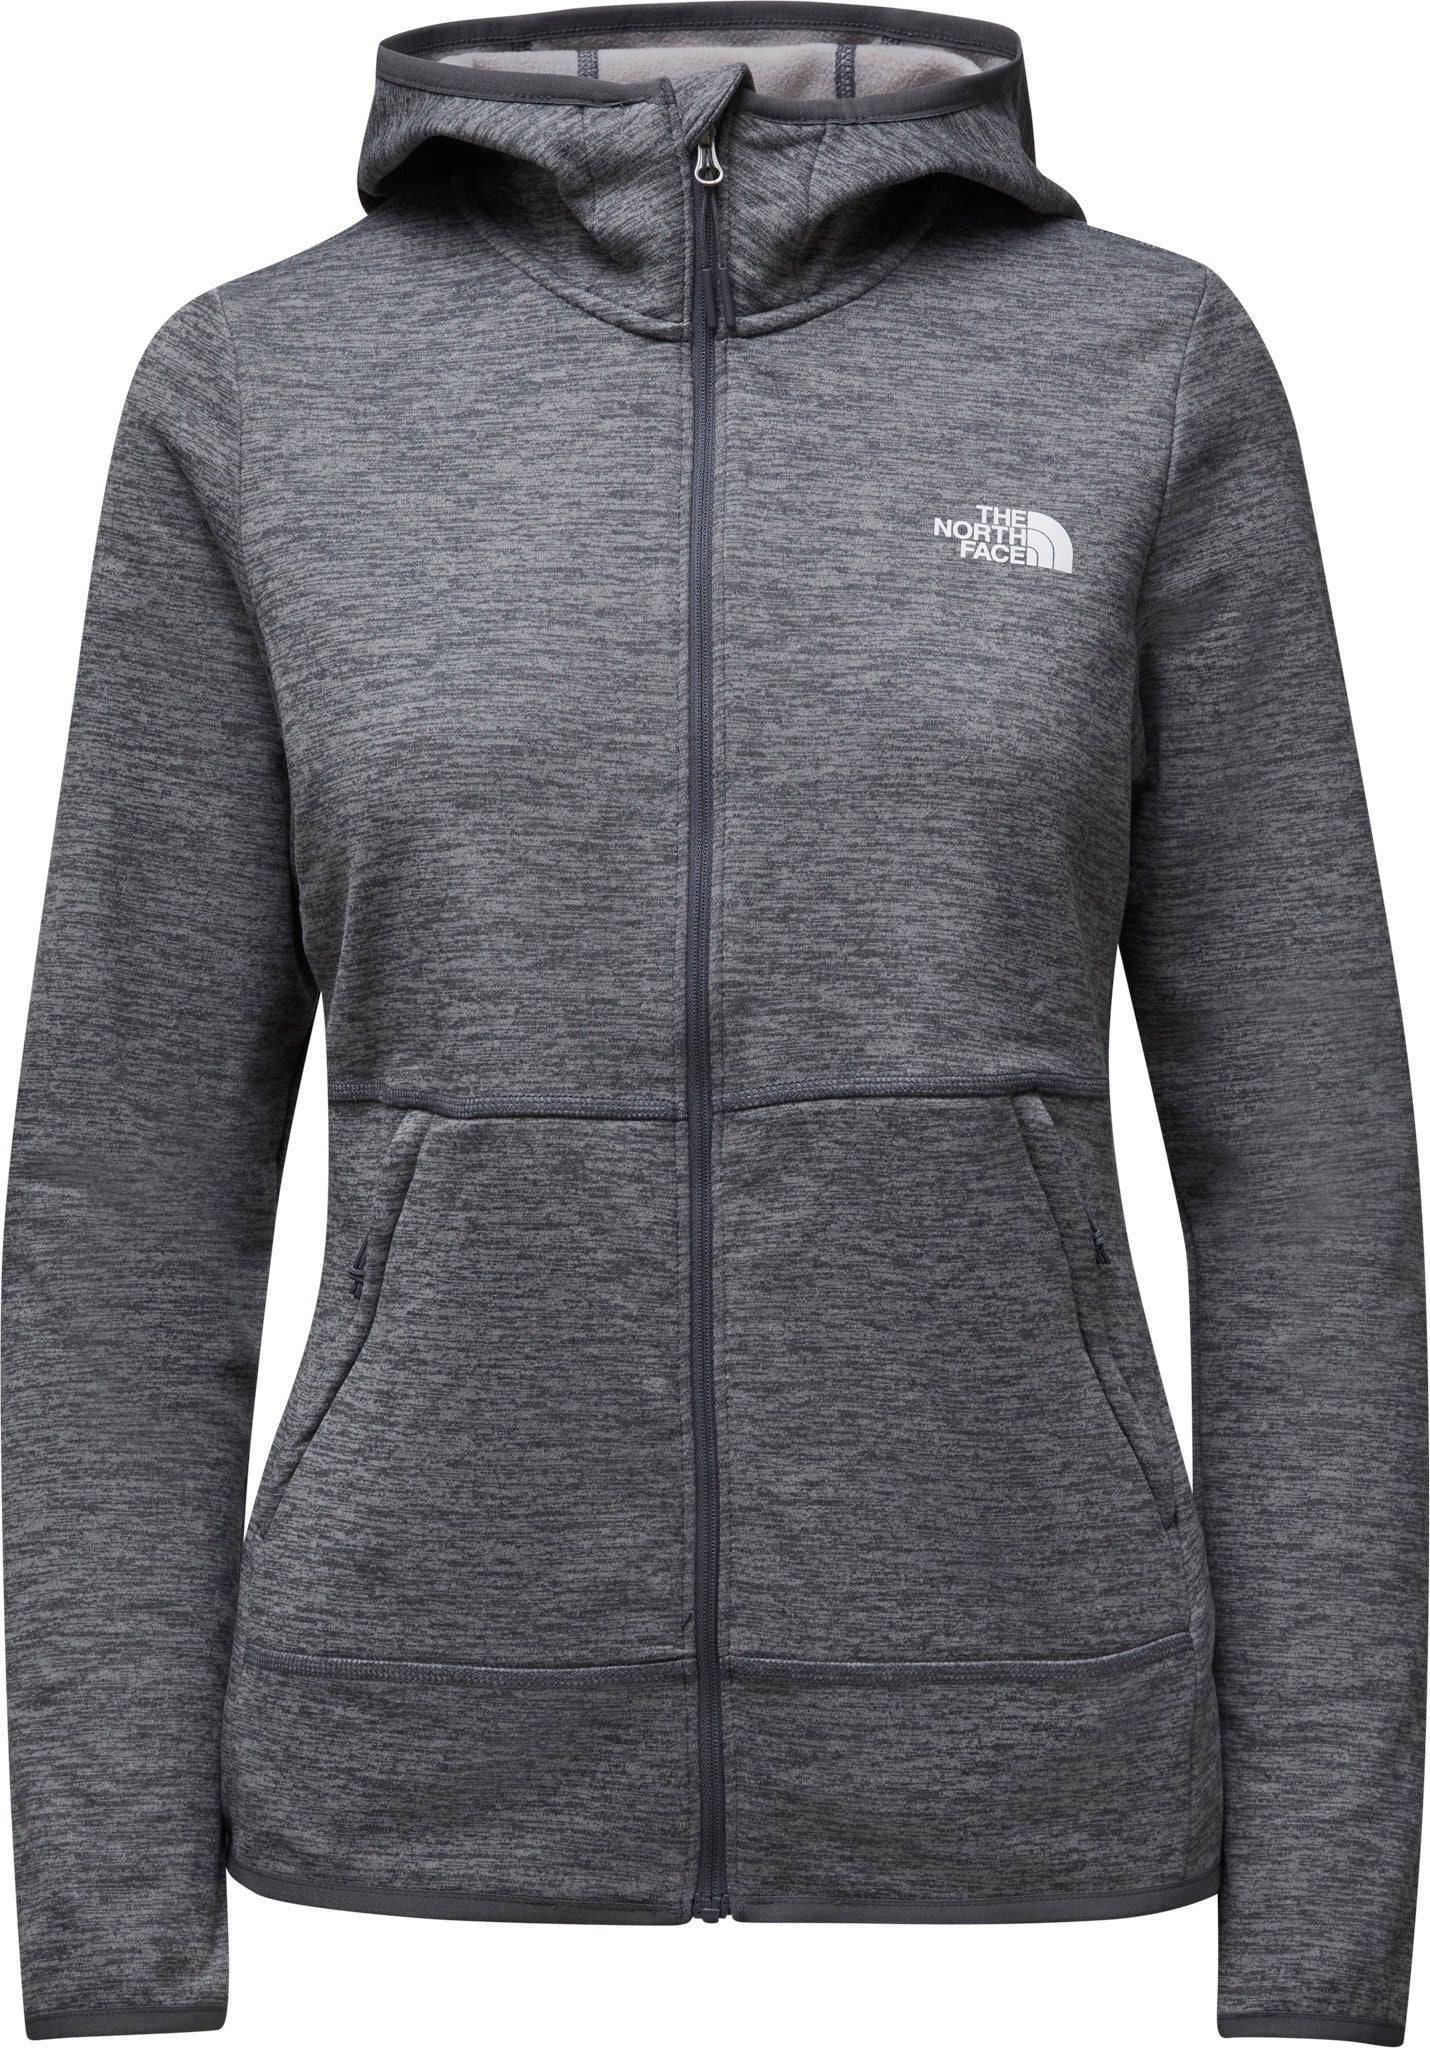 The North Face Canyonlands Hoodie - Women's | Altitude Sports